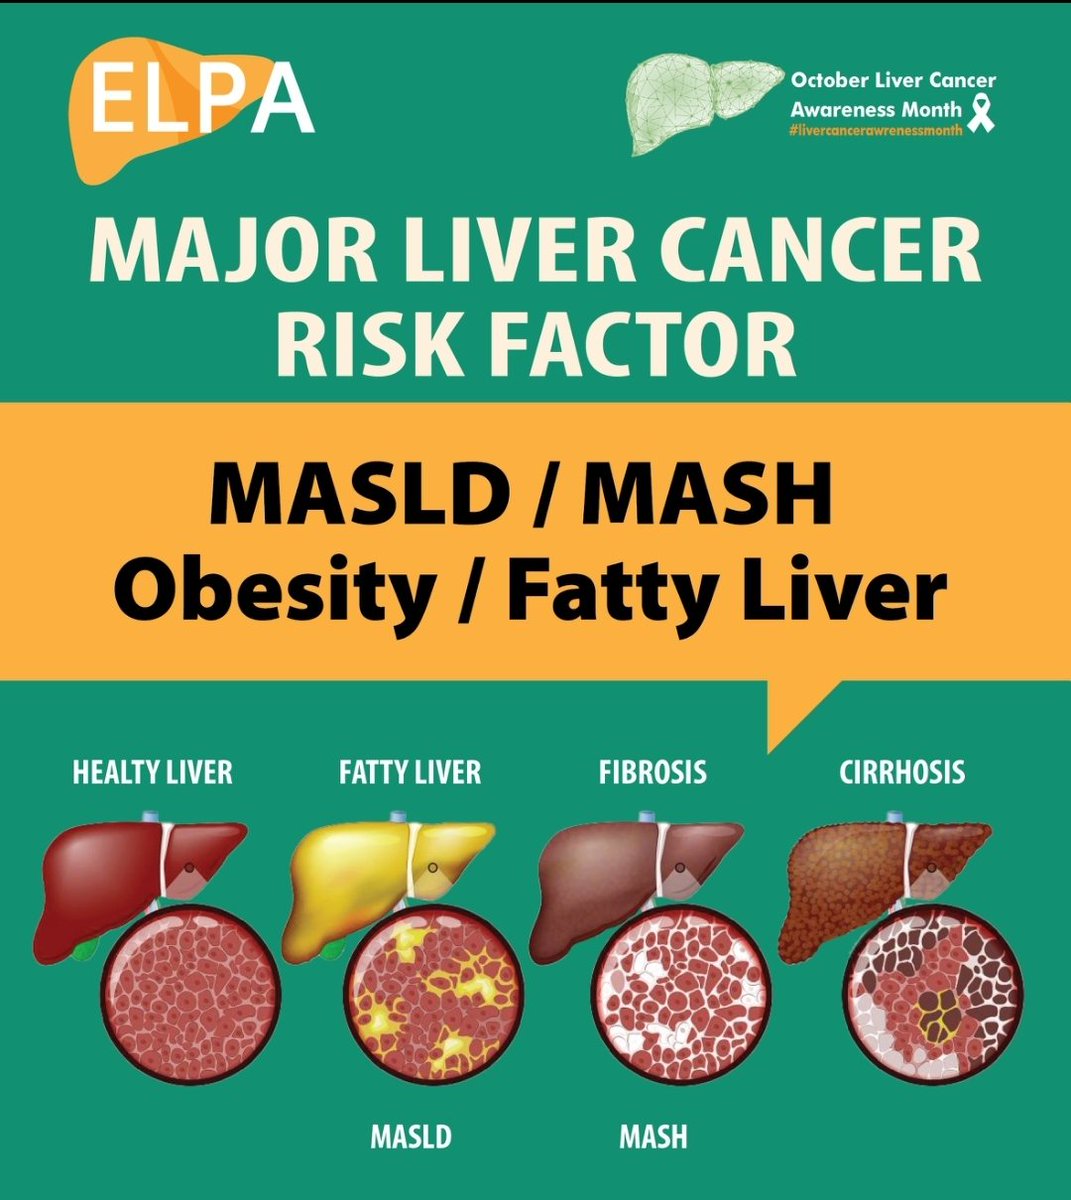 🌟 Take Charge of Your Health and Lower #LiverCancer Risk! 🌟 Did you know that nearly 50% of liver cancer cases are preventable? That means YOU have the power to reduce your risk and live a healthier life! 💪#Lifestyle #physicalactivity #LiverCancerAwarenessMonth #EUCancerPlan